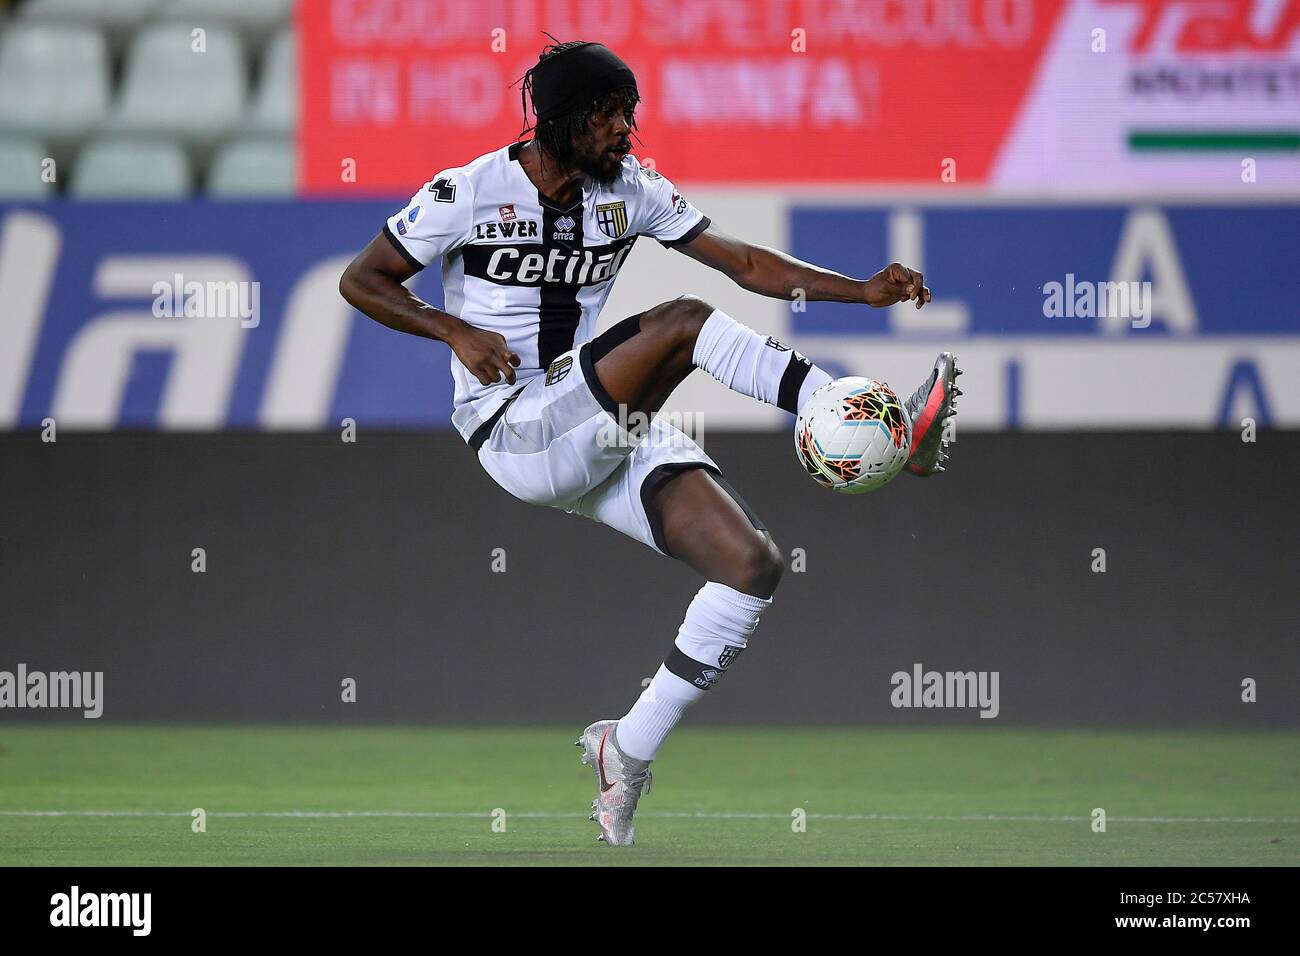 Parma, Italy - 28 June, 2020: Gervinho of Parma Calcio in action during the Serie A football match between Parma Calcio and FC Internazionale. FC Internazionale won 2-1 over Parma Calcio. Credit: Nicolò Campo/Alamy Live News Stock Photo